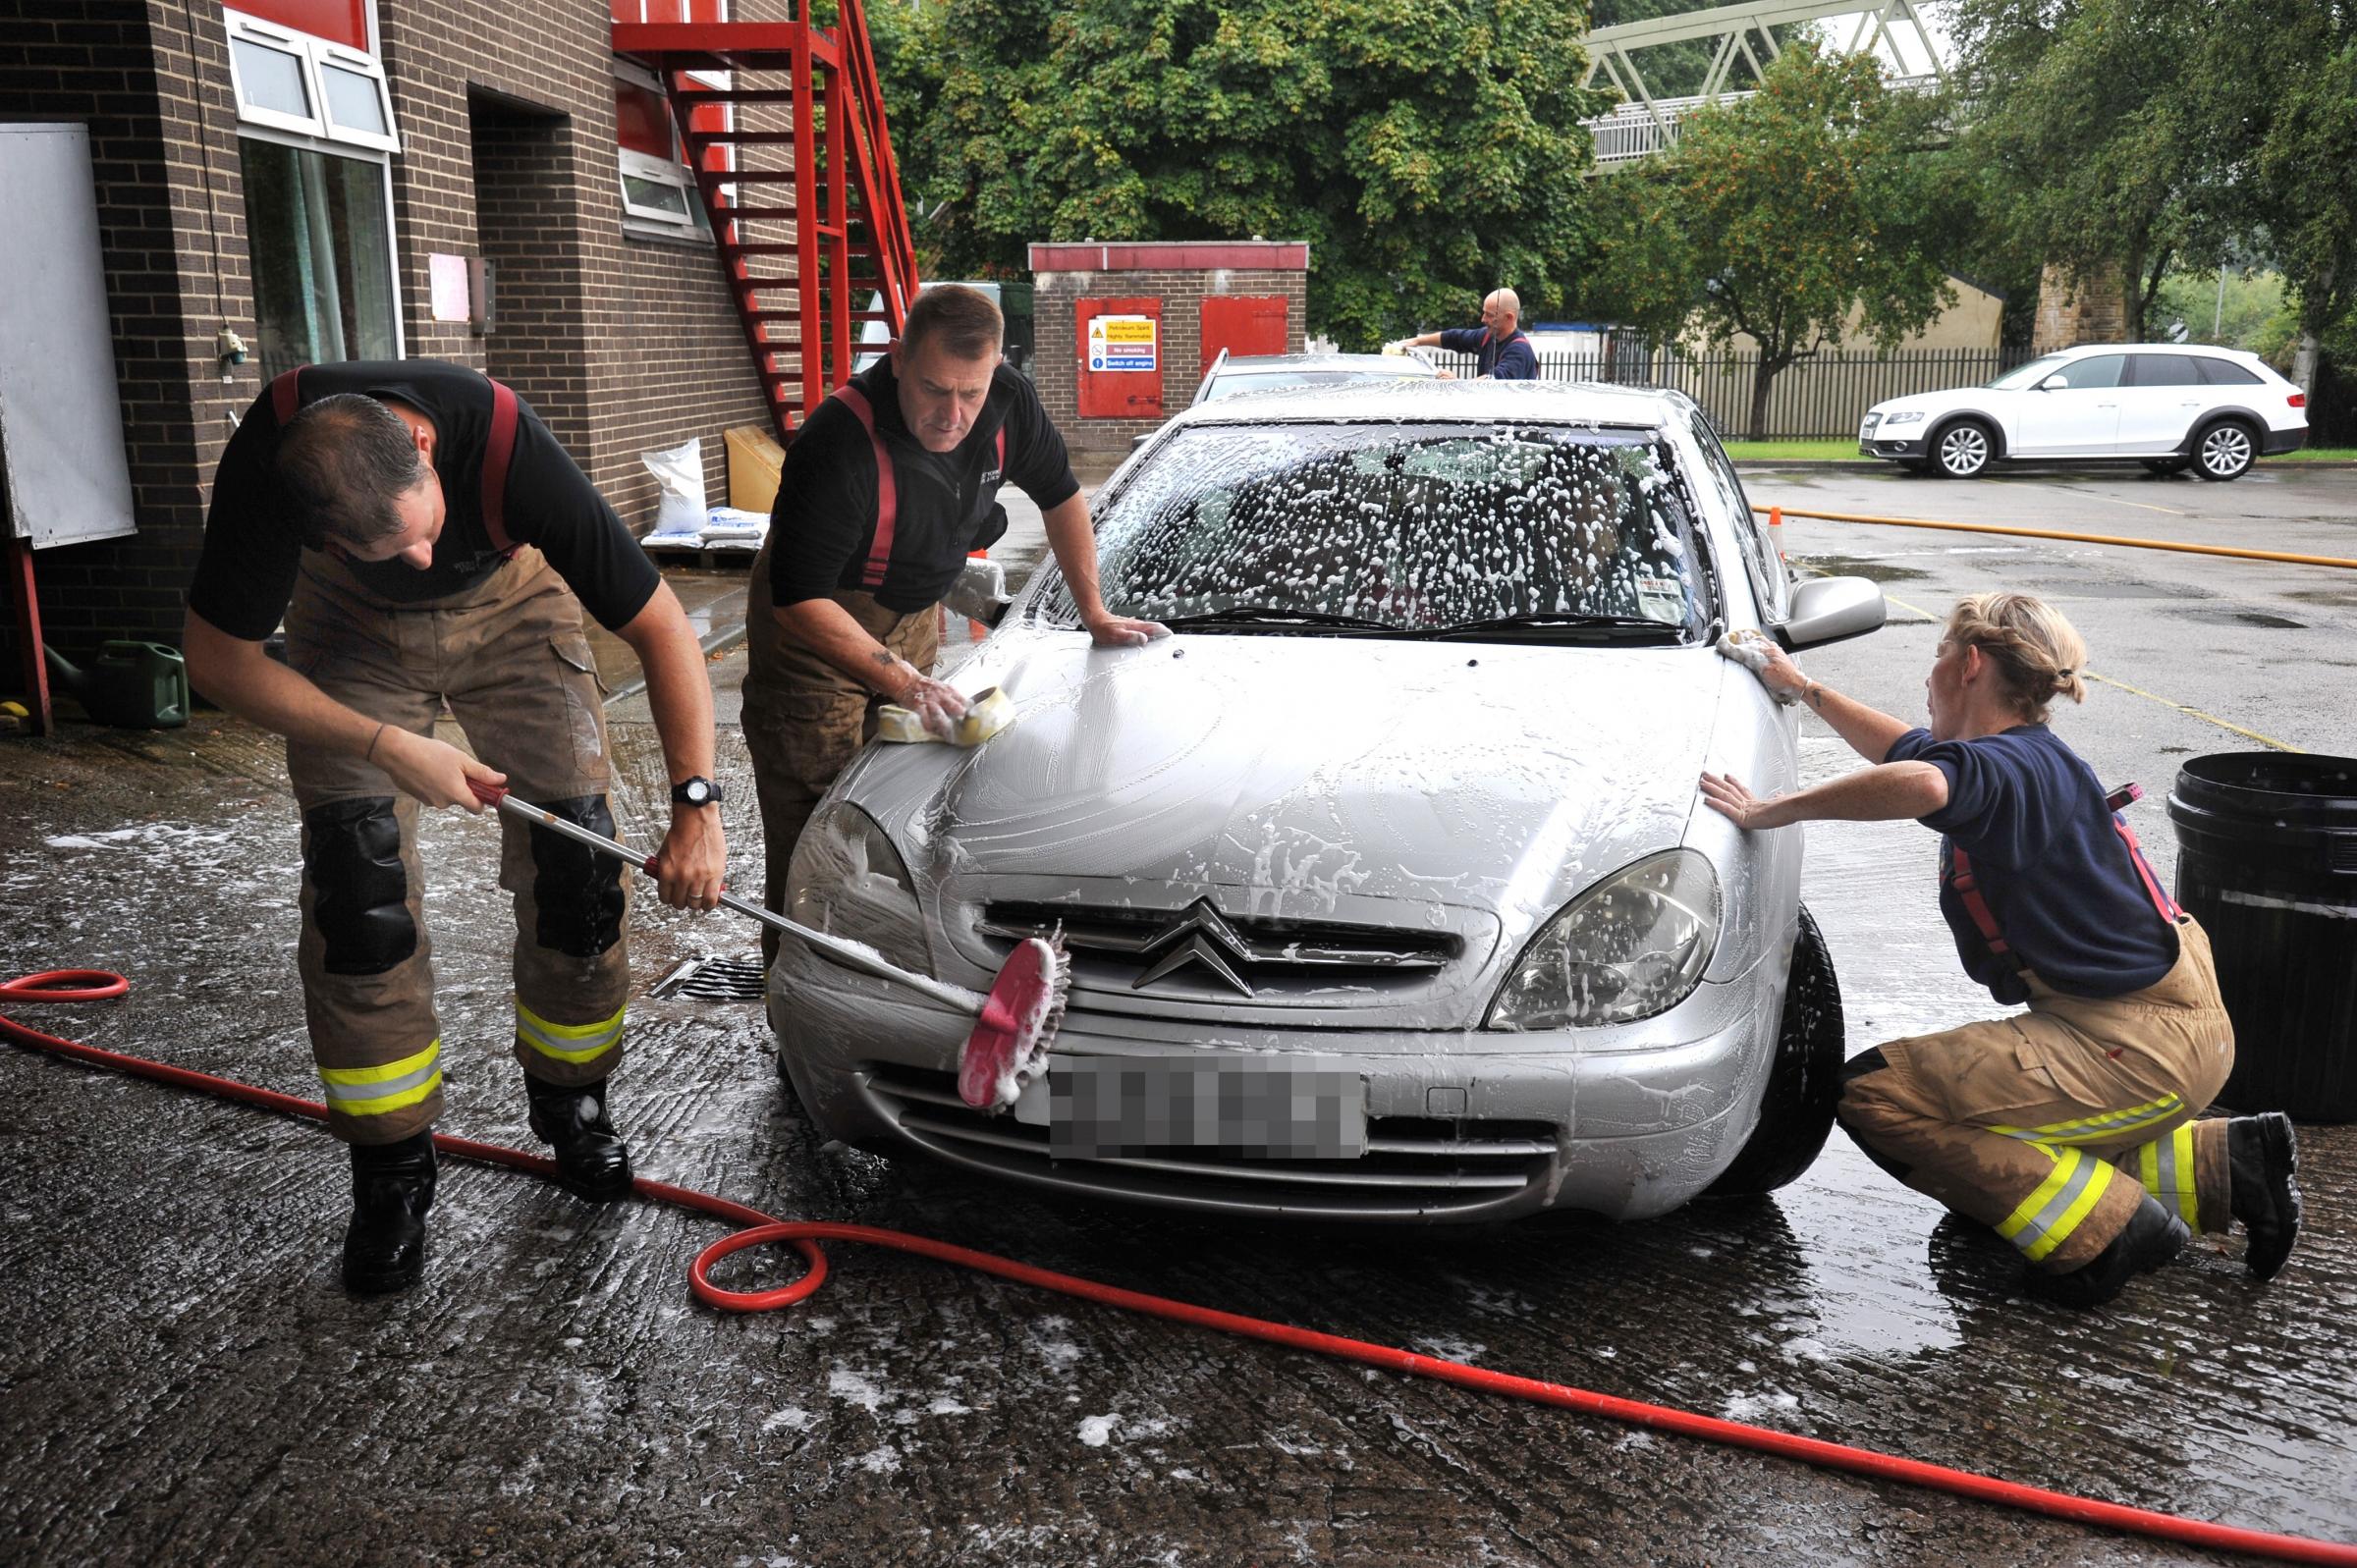 Firefighters offer popular car wash event in aid of Firefighters Charity